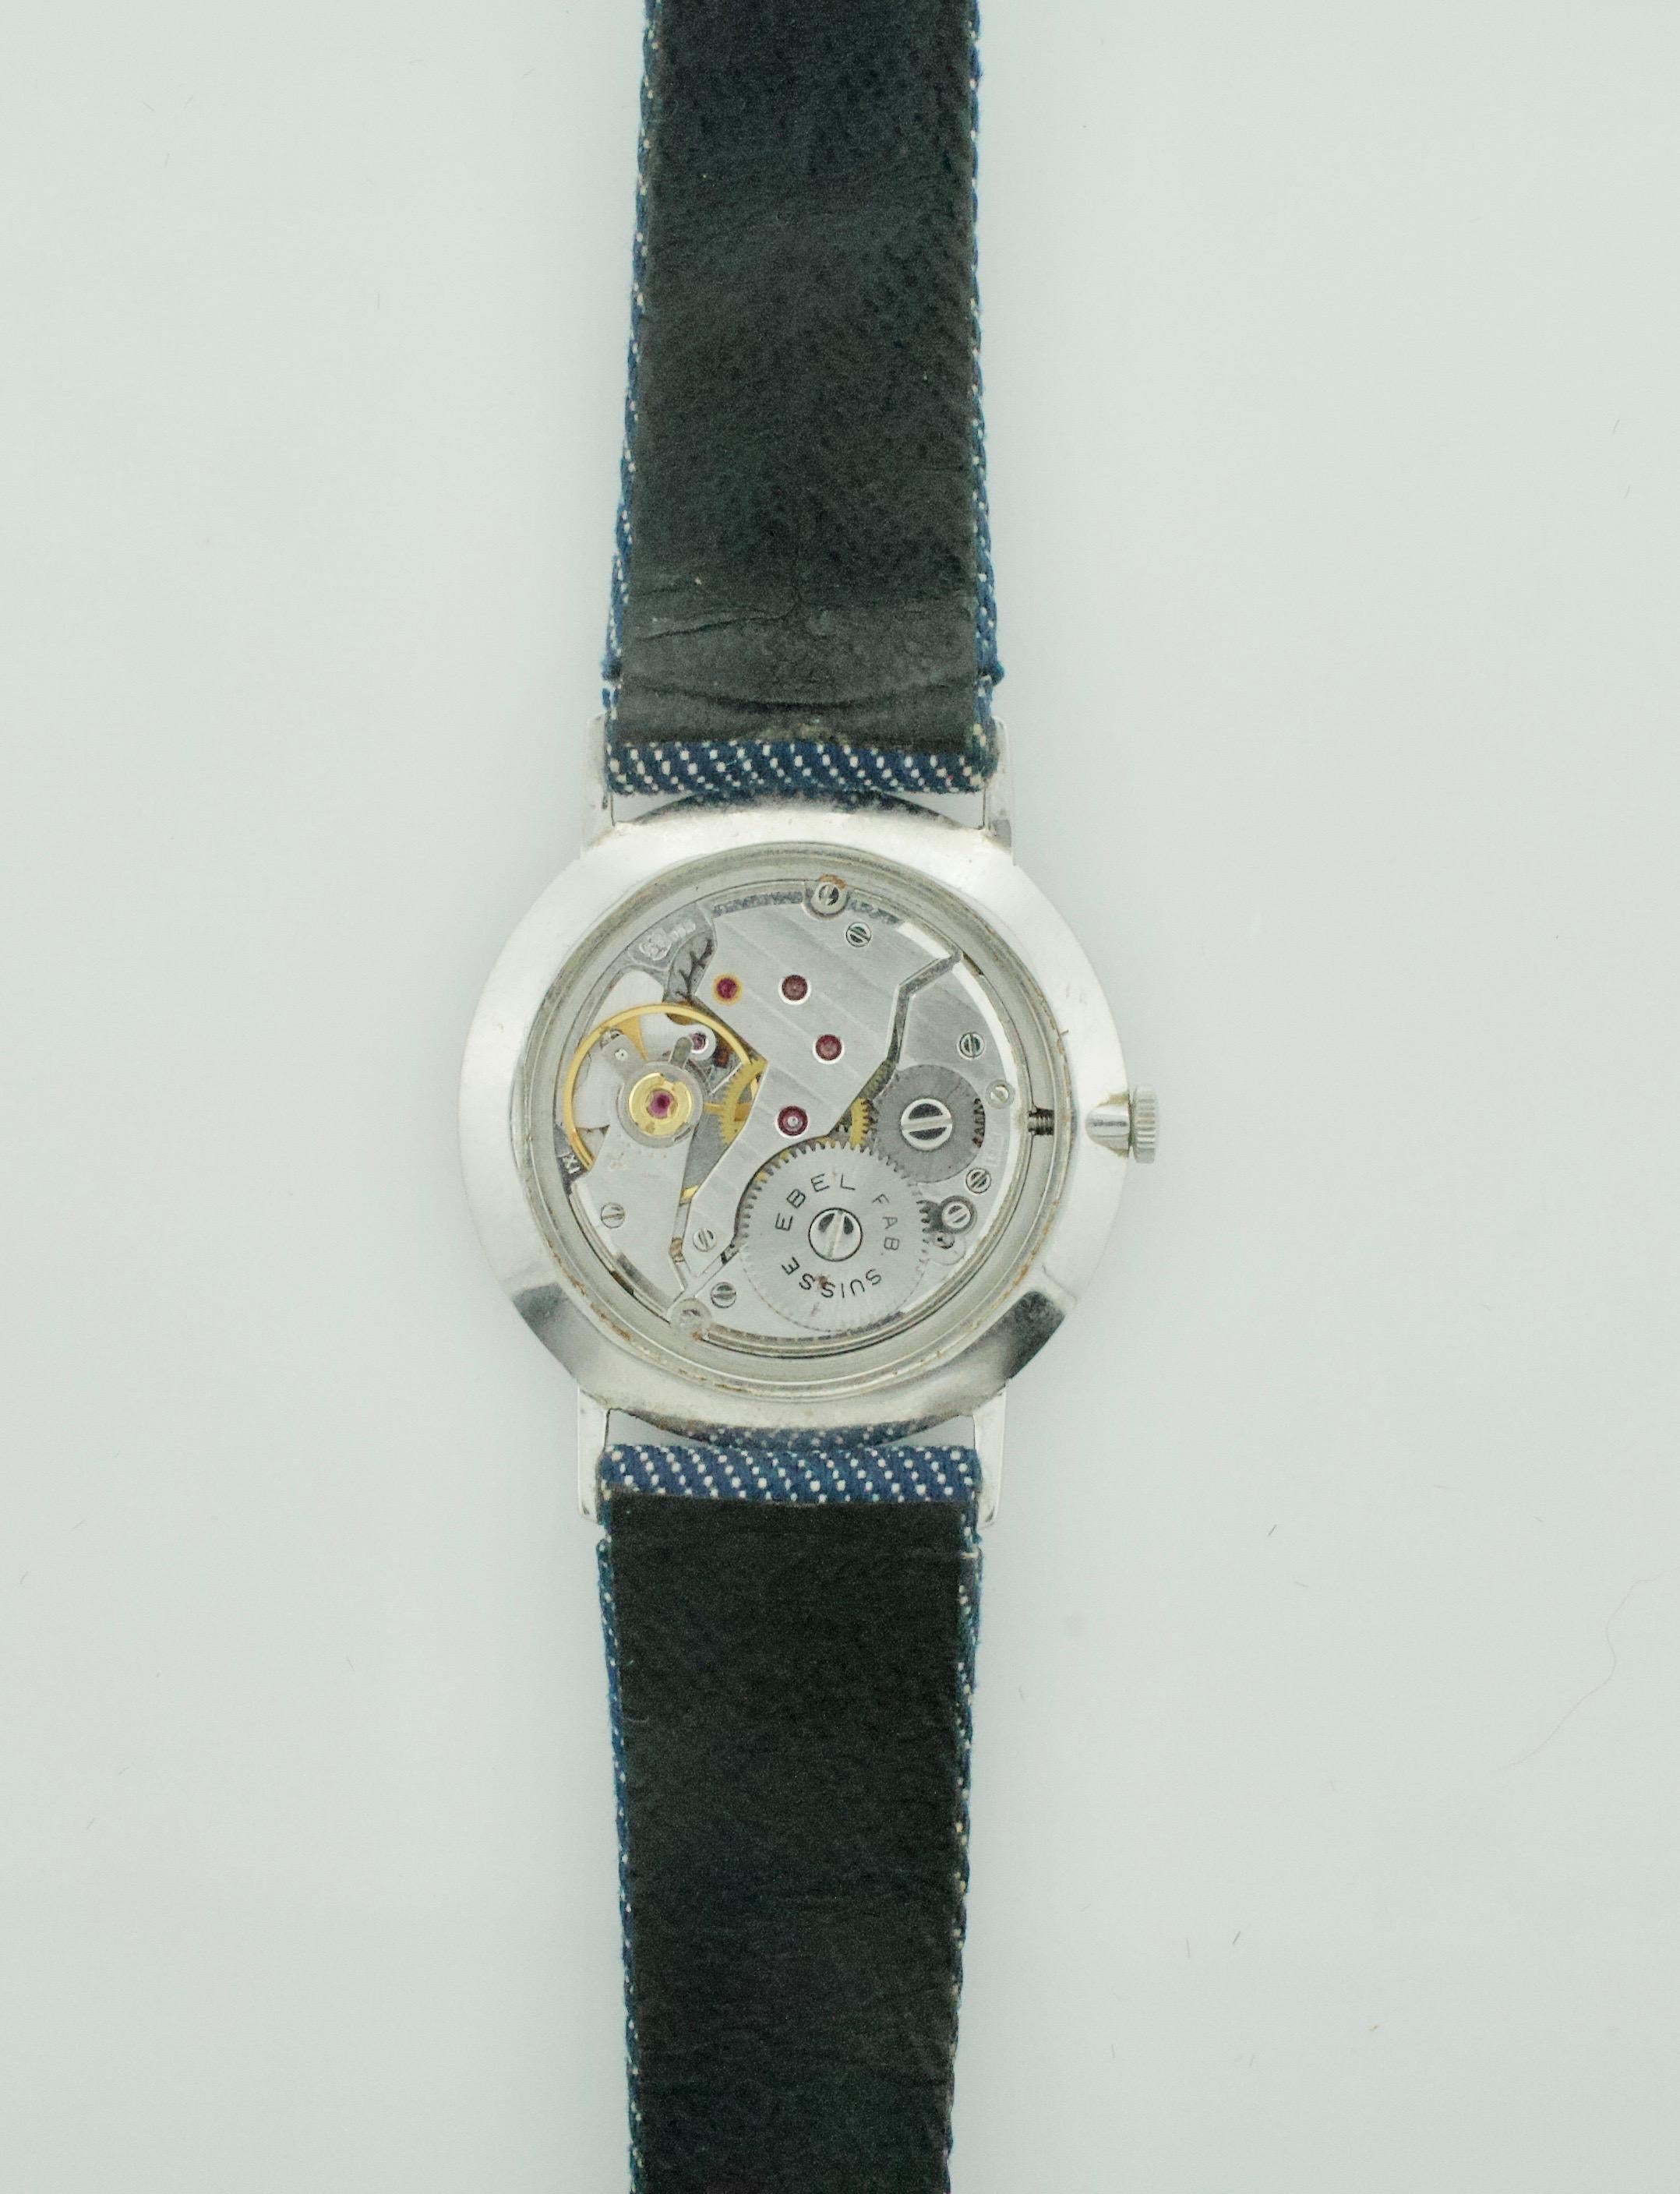 Van Cleef and Arpels Denim Watch in Stainless Steel with 3 Extra Bands and Pouch
From The Owners Private Collection
A Watch with Denim Bands and Pouch.  Movement by Ebel
Circa 1960's
9 Inches in Length (End of Buckle to Tip)

Some fading on Band and